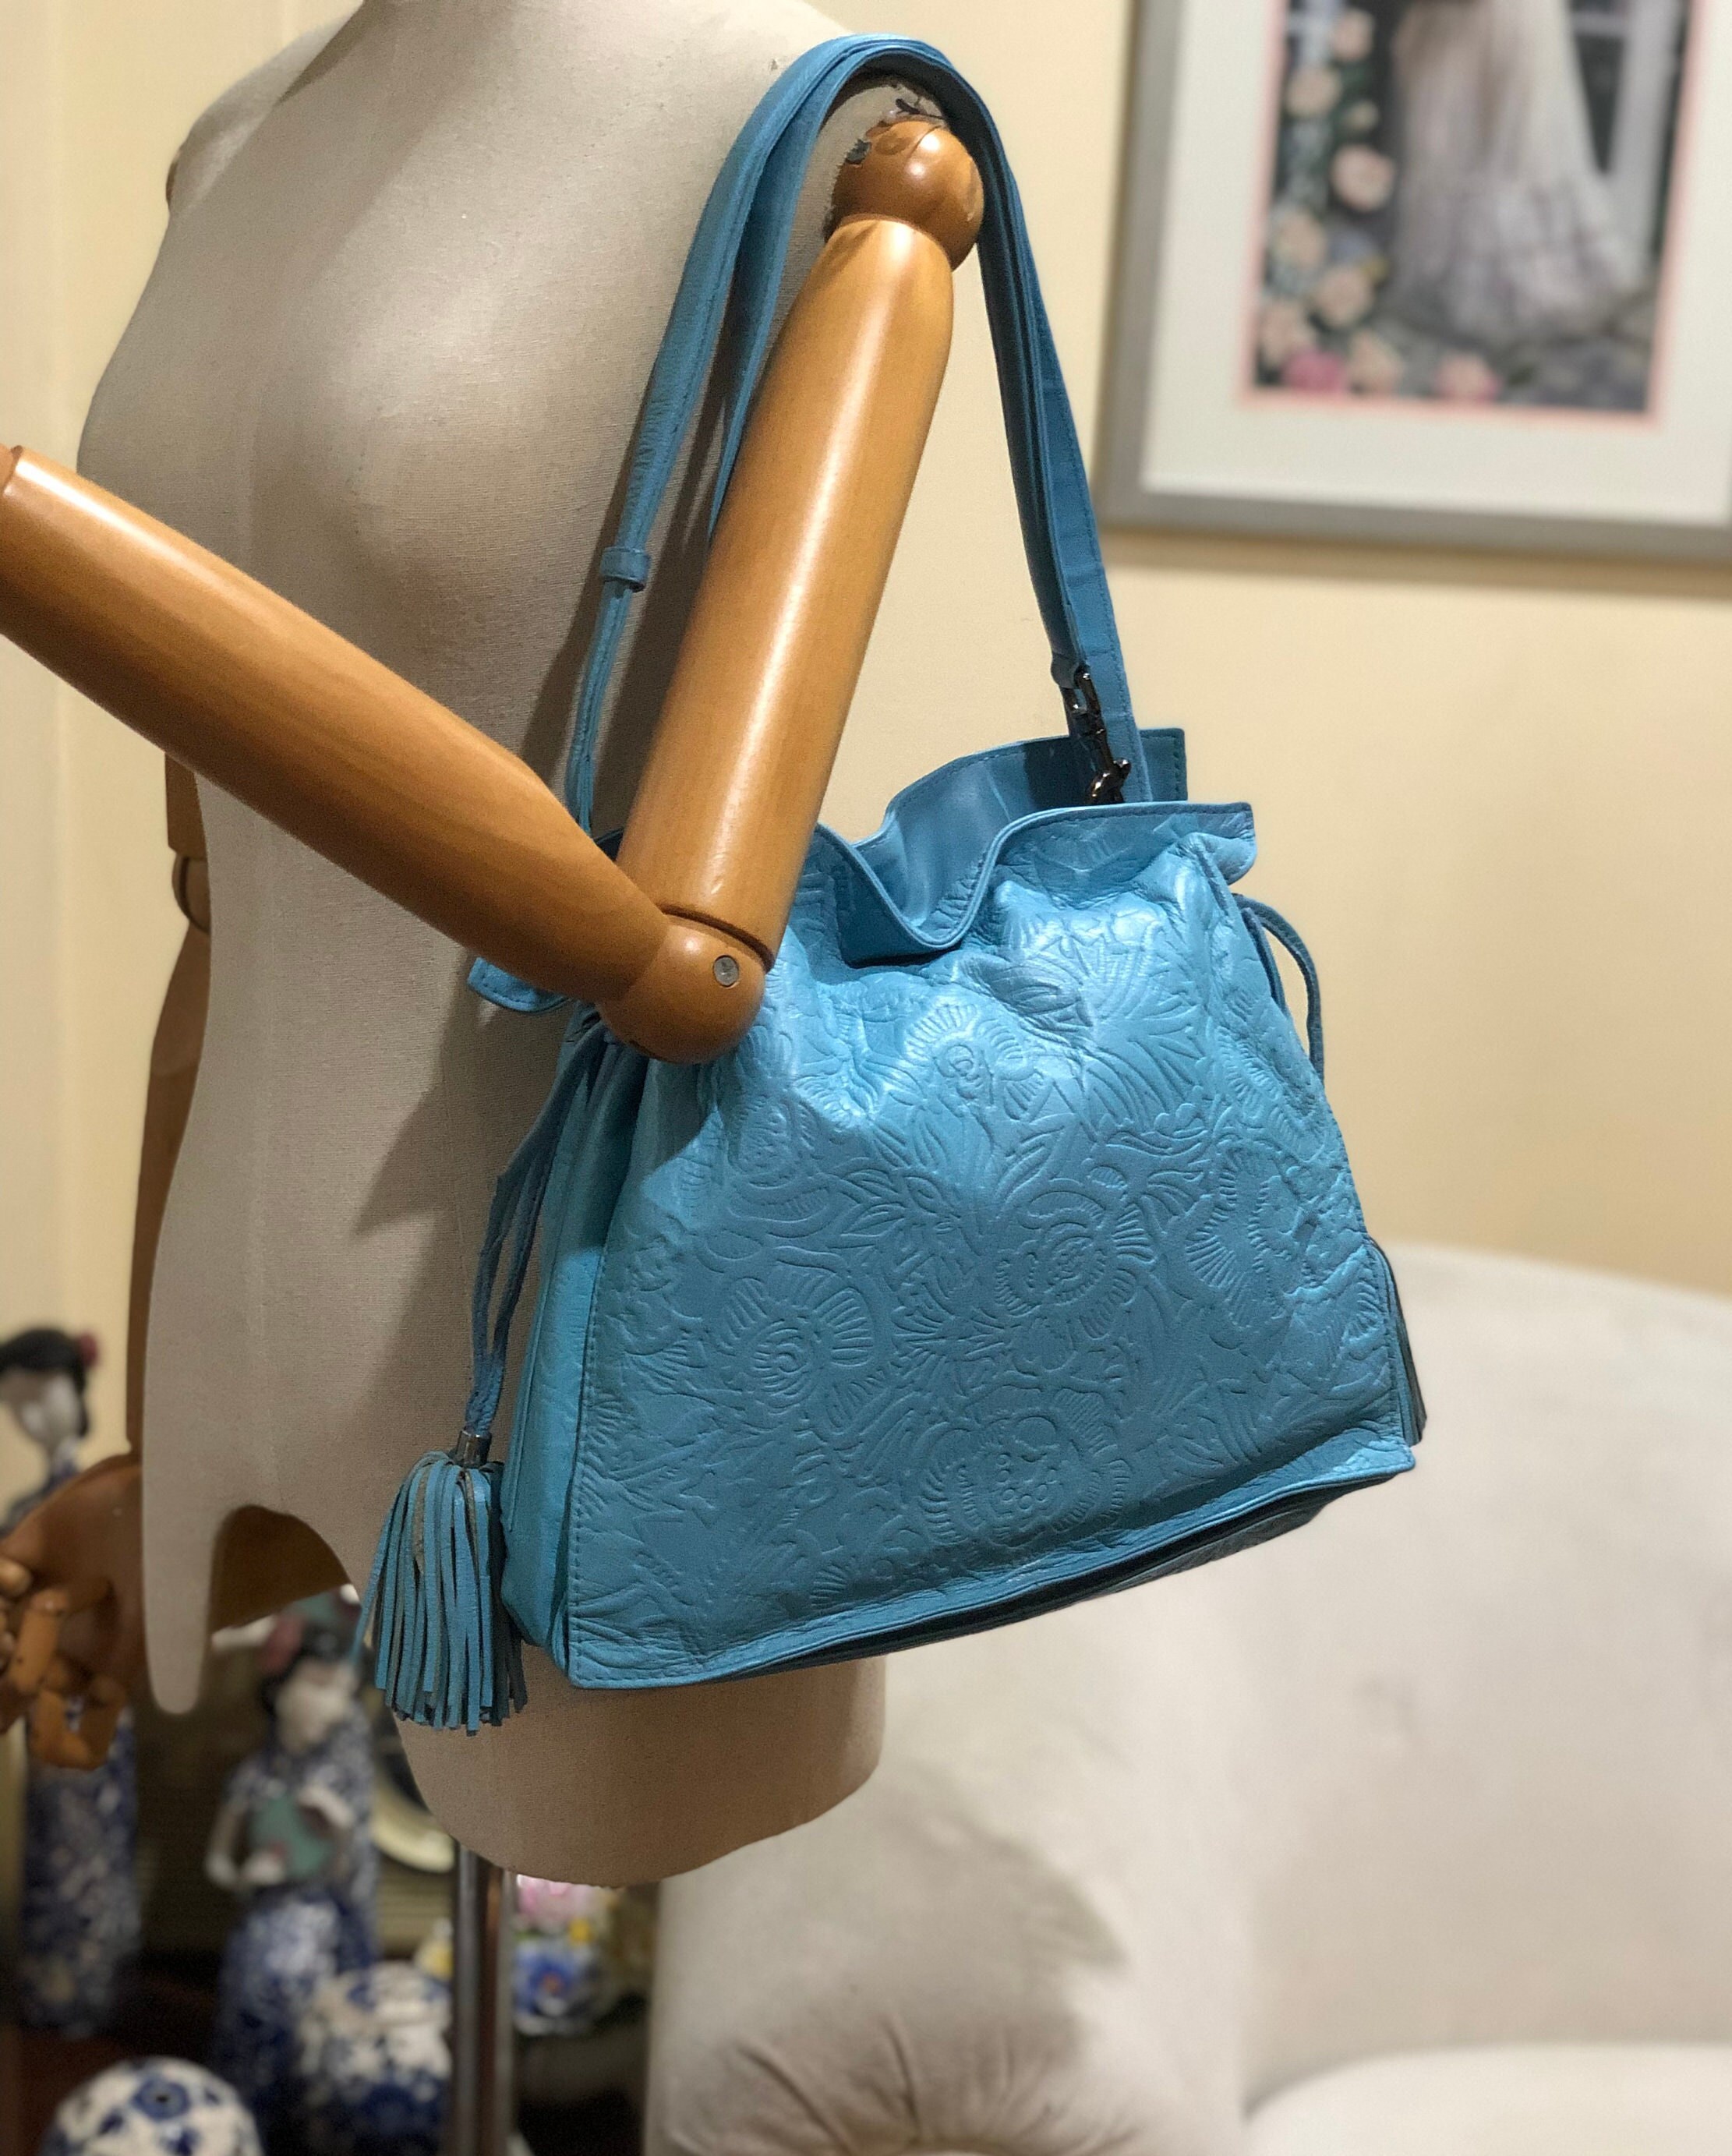 Loewe - Authenticated Puzzle Handbag - Leather Blue for Women, Never Worn